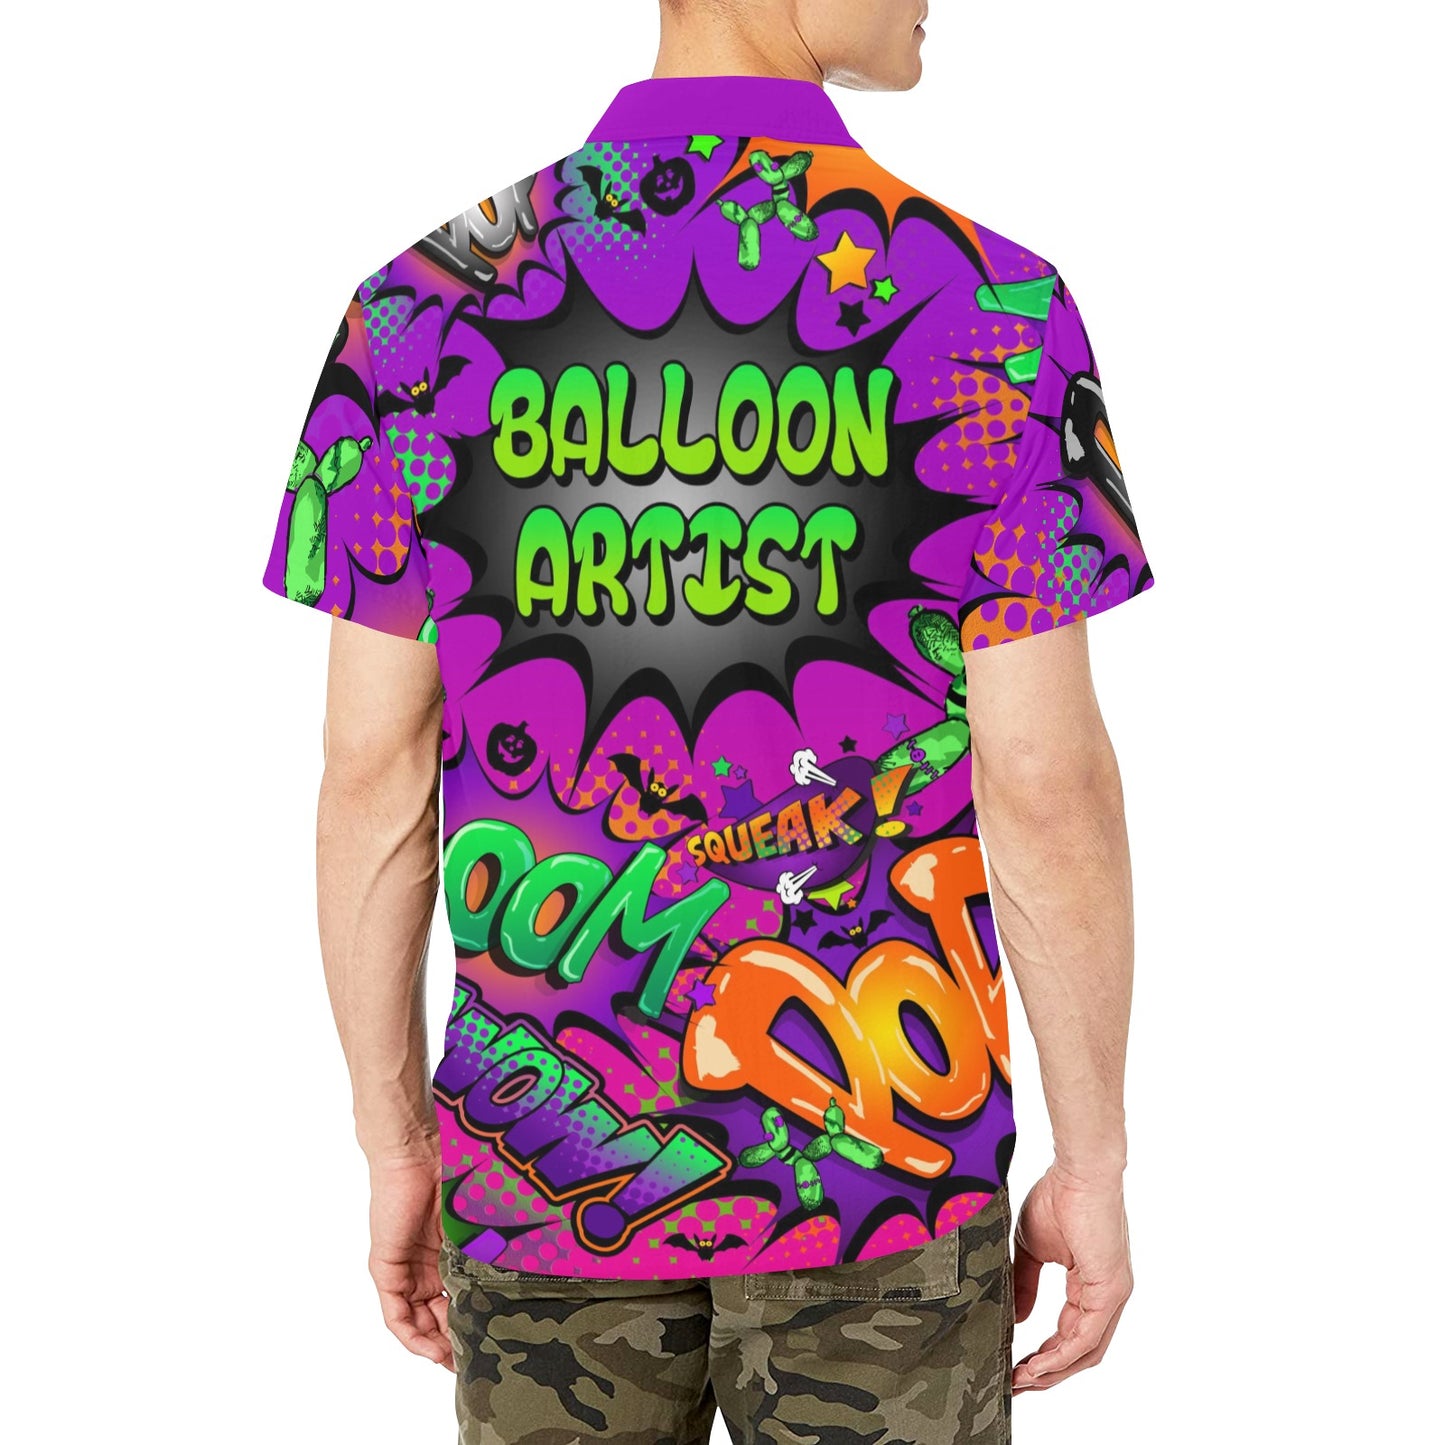 Purple and pink balloon artists shirt for Halloween